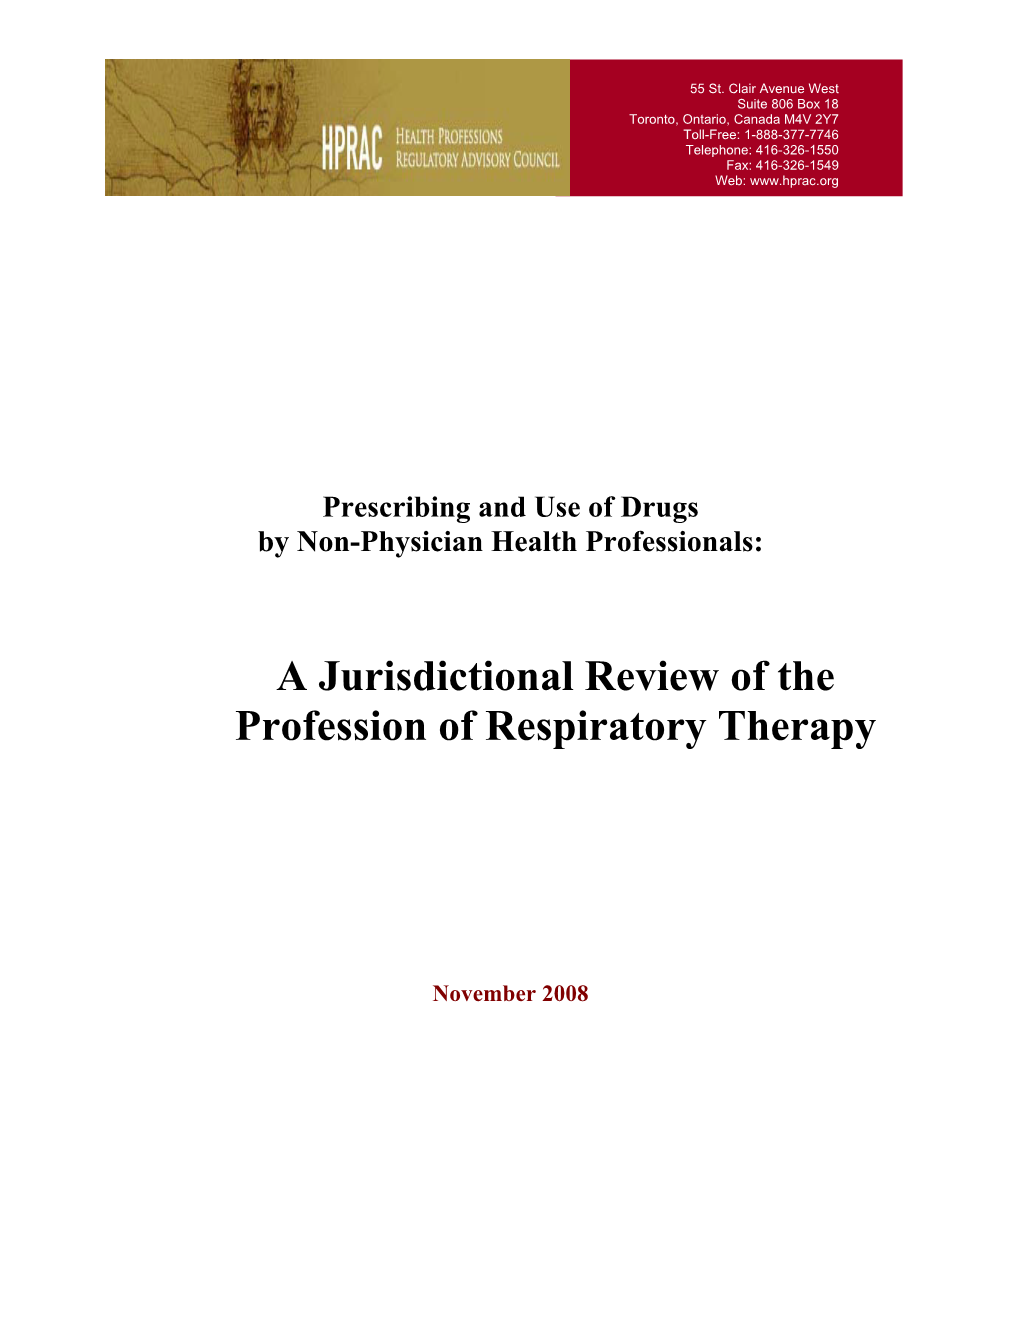 A Jurisdictional Review of the Profession of Respiratory Therapy